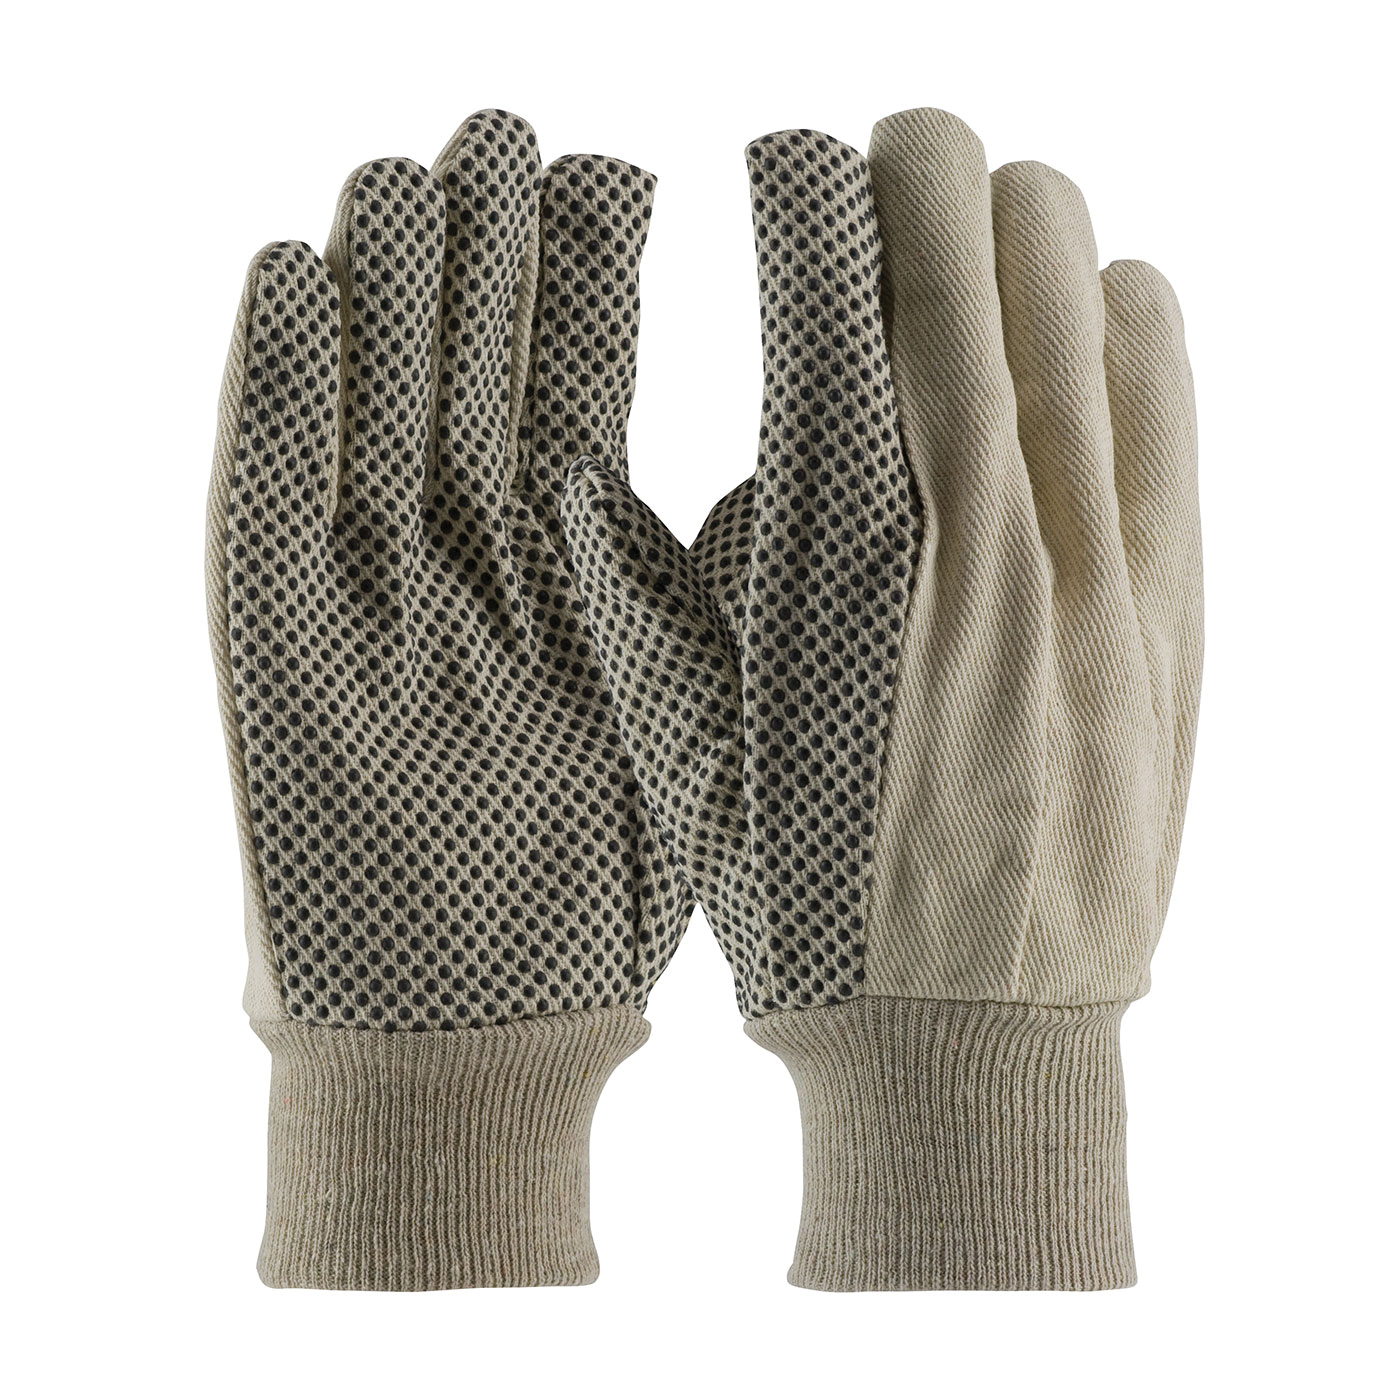 PIP® 91-908PDI Economy Grade Men's General Purpose Gloves, Fabric/Work, Clute Cut/Straight Thumb Style, L, PVC Palm, 60% Polyester/40% Cotton, Natural, Knit Wrist Cuff, PVC Coating, Resists: Abrasion and Cut, Canvas Lining